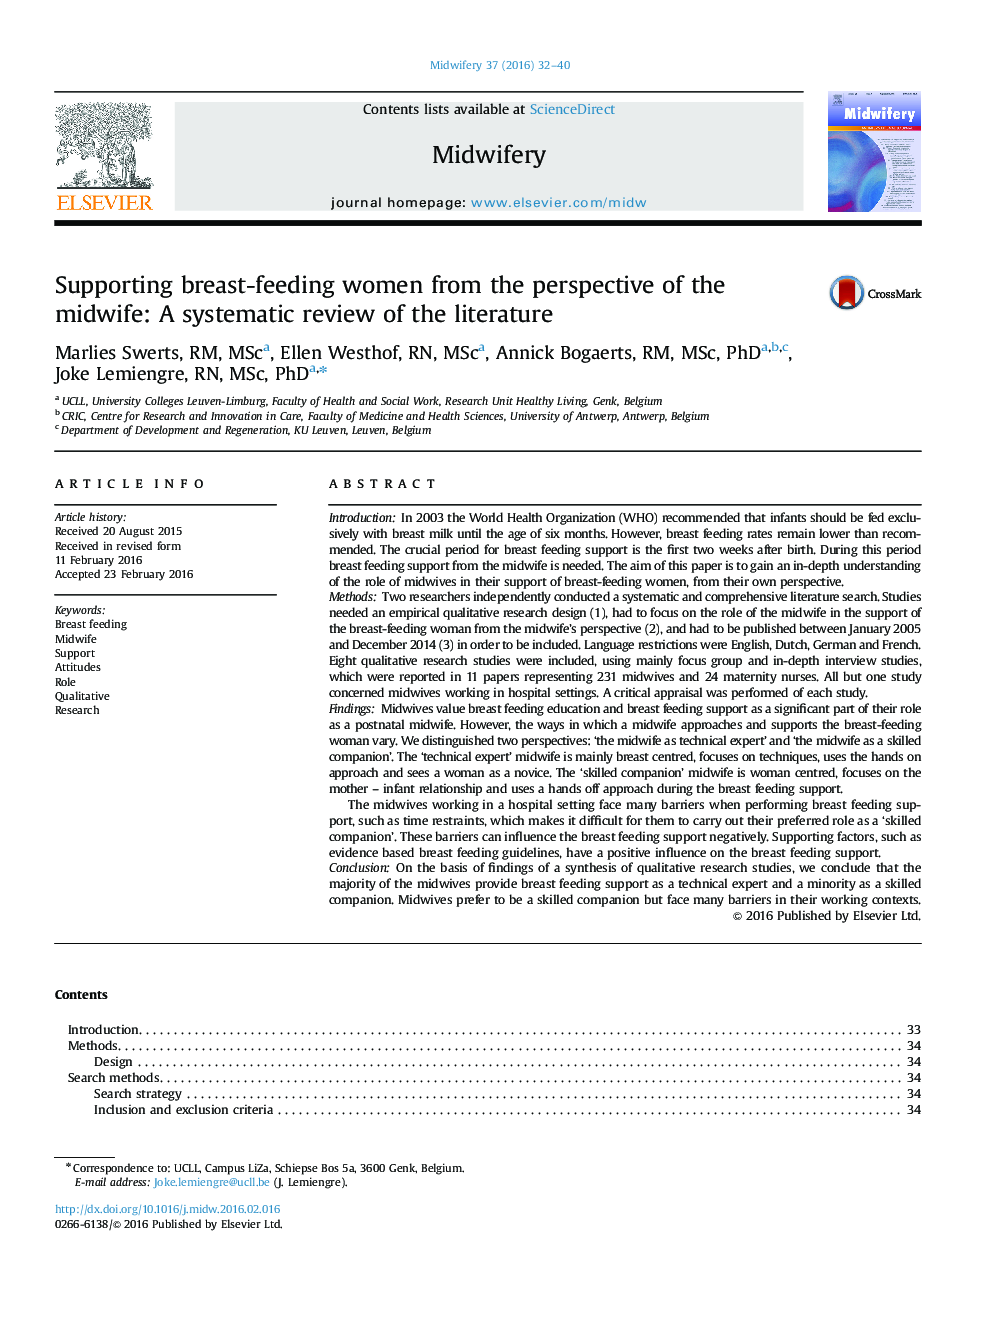 Supporting breast-feeding women from the perspective of the midwife: A systematic review of the literature